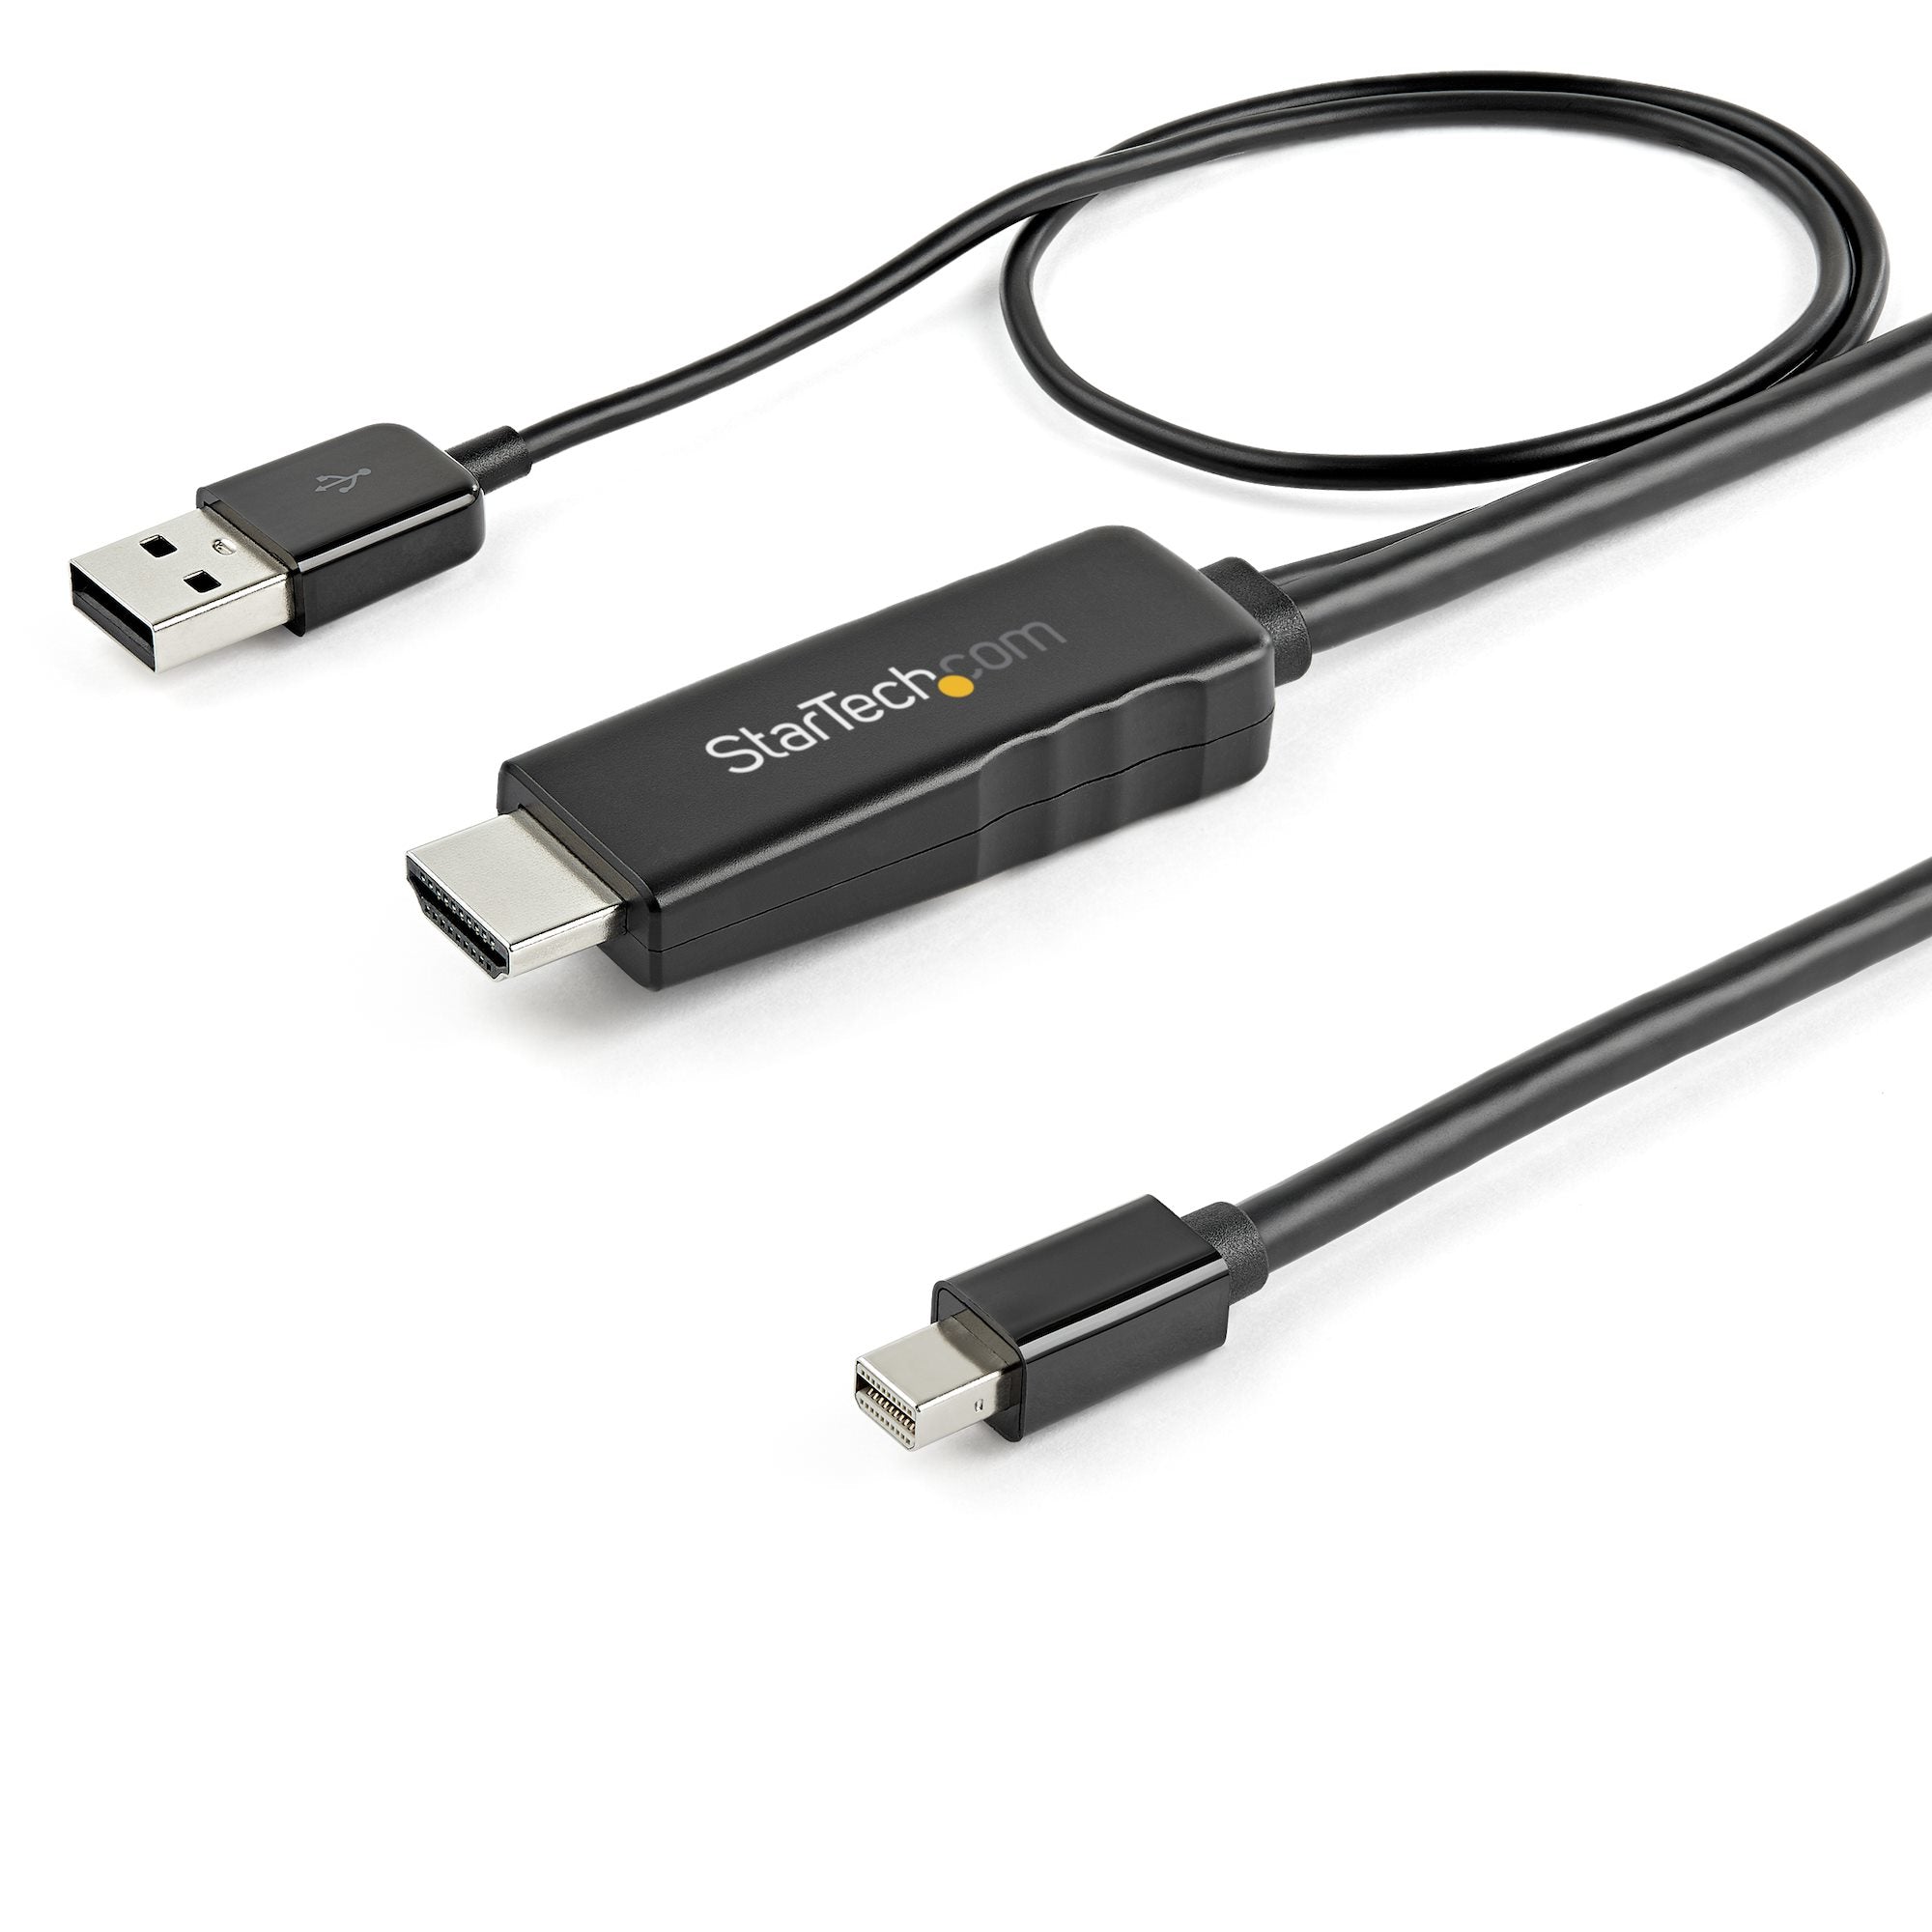 StarTech.com 3ft (1m) HDMI to Mini DisplayPort Cable 4K 30Hz - Active HDMI to mDP Adapter Converter Cable with Audio - USB Powered - Mac & Windows - Male to Male Video Adapter Cable